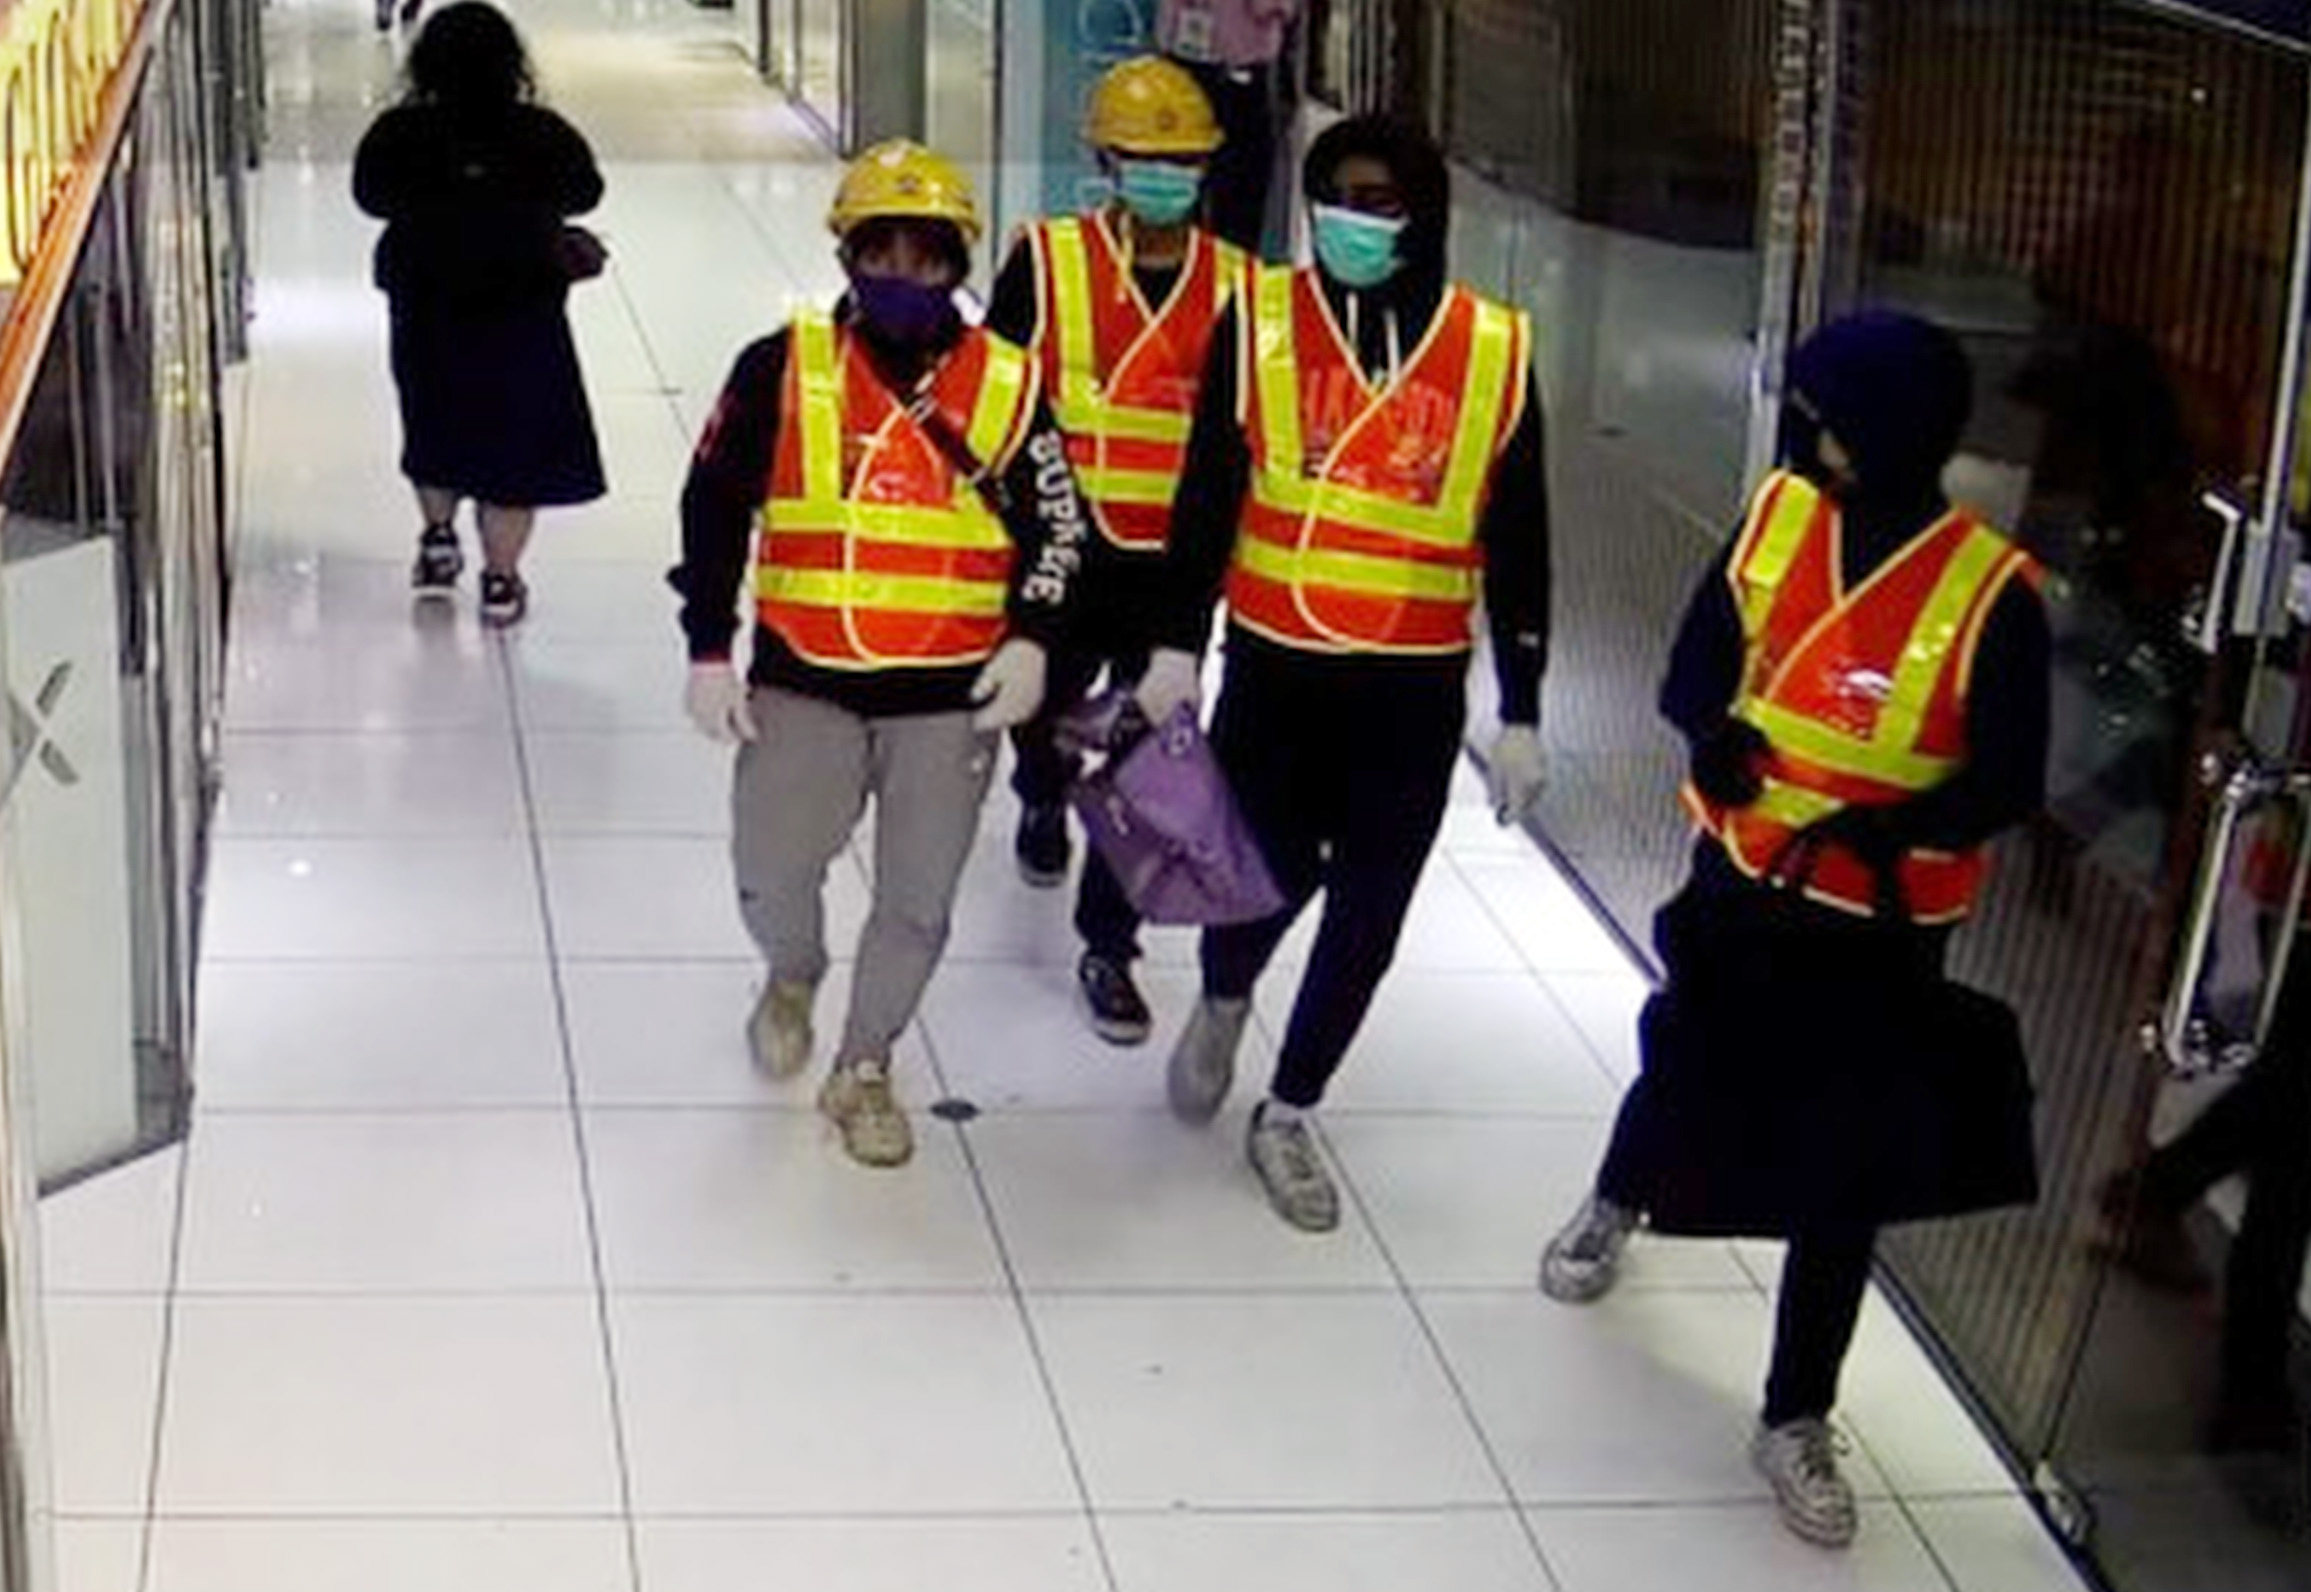 The four men dressed as construction workers who stole HK$10 million worth of luxury watches in a raid on a store in Tsim Sha Tsui. Photo: Handout